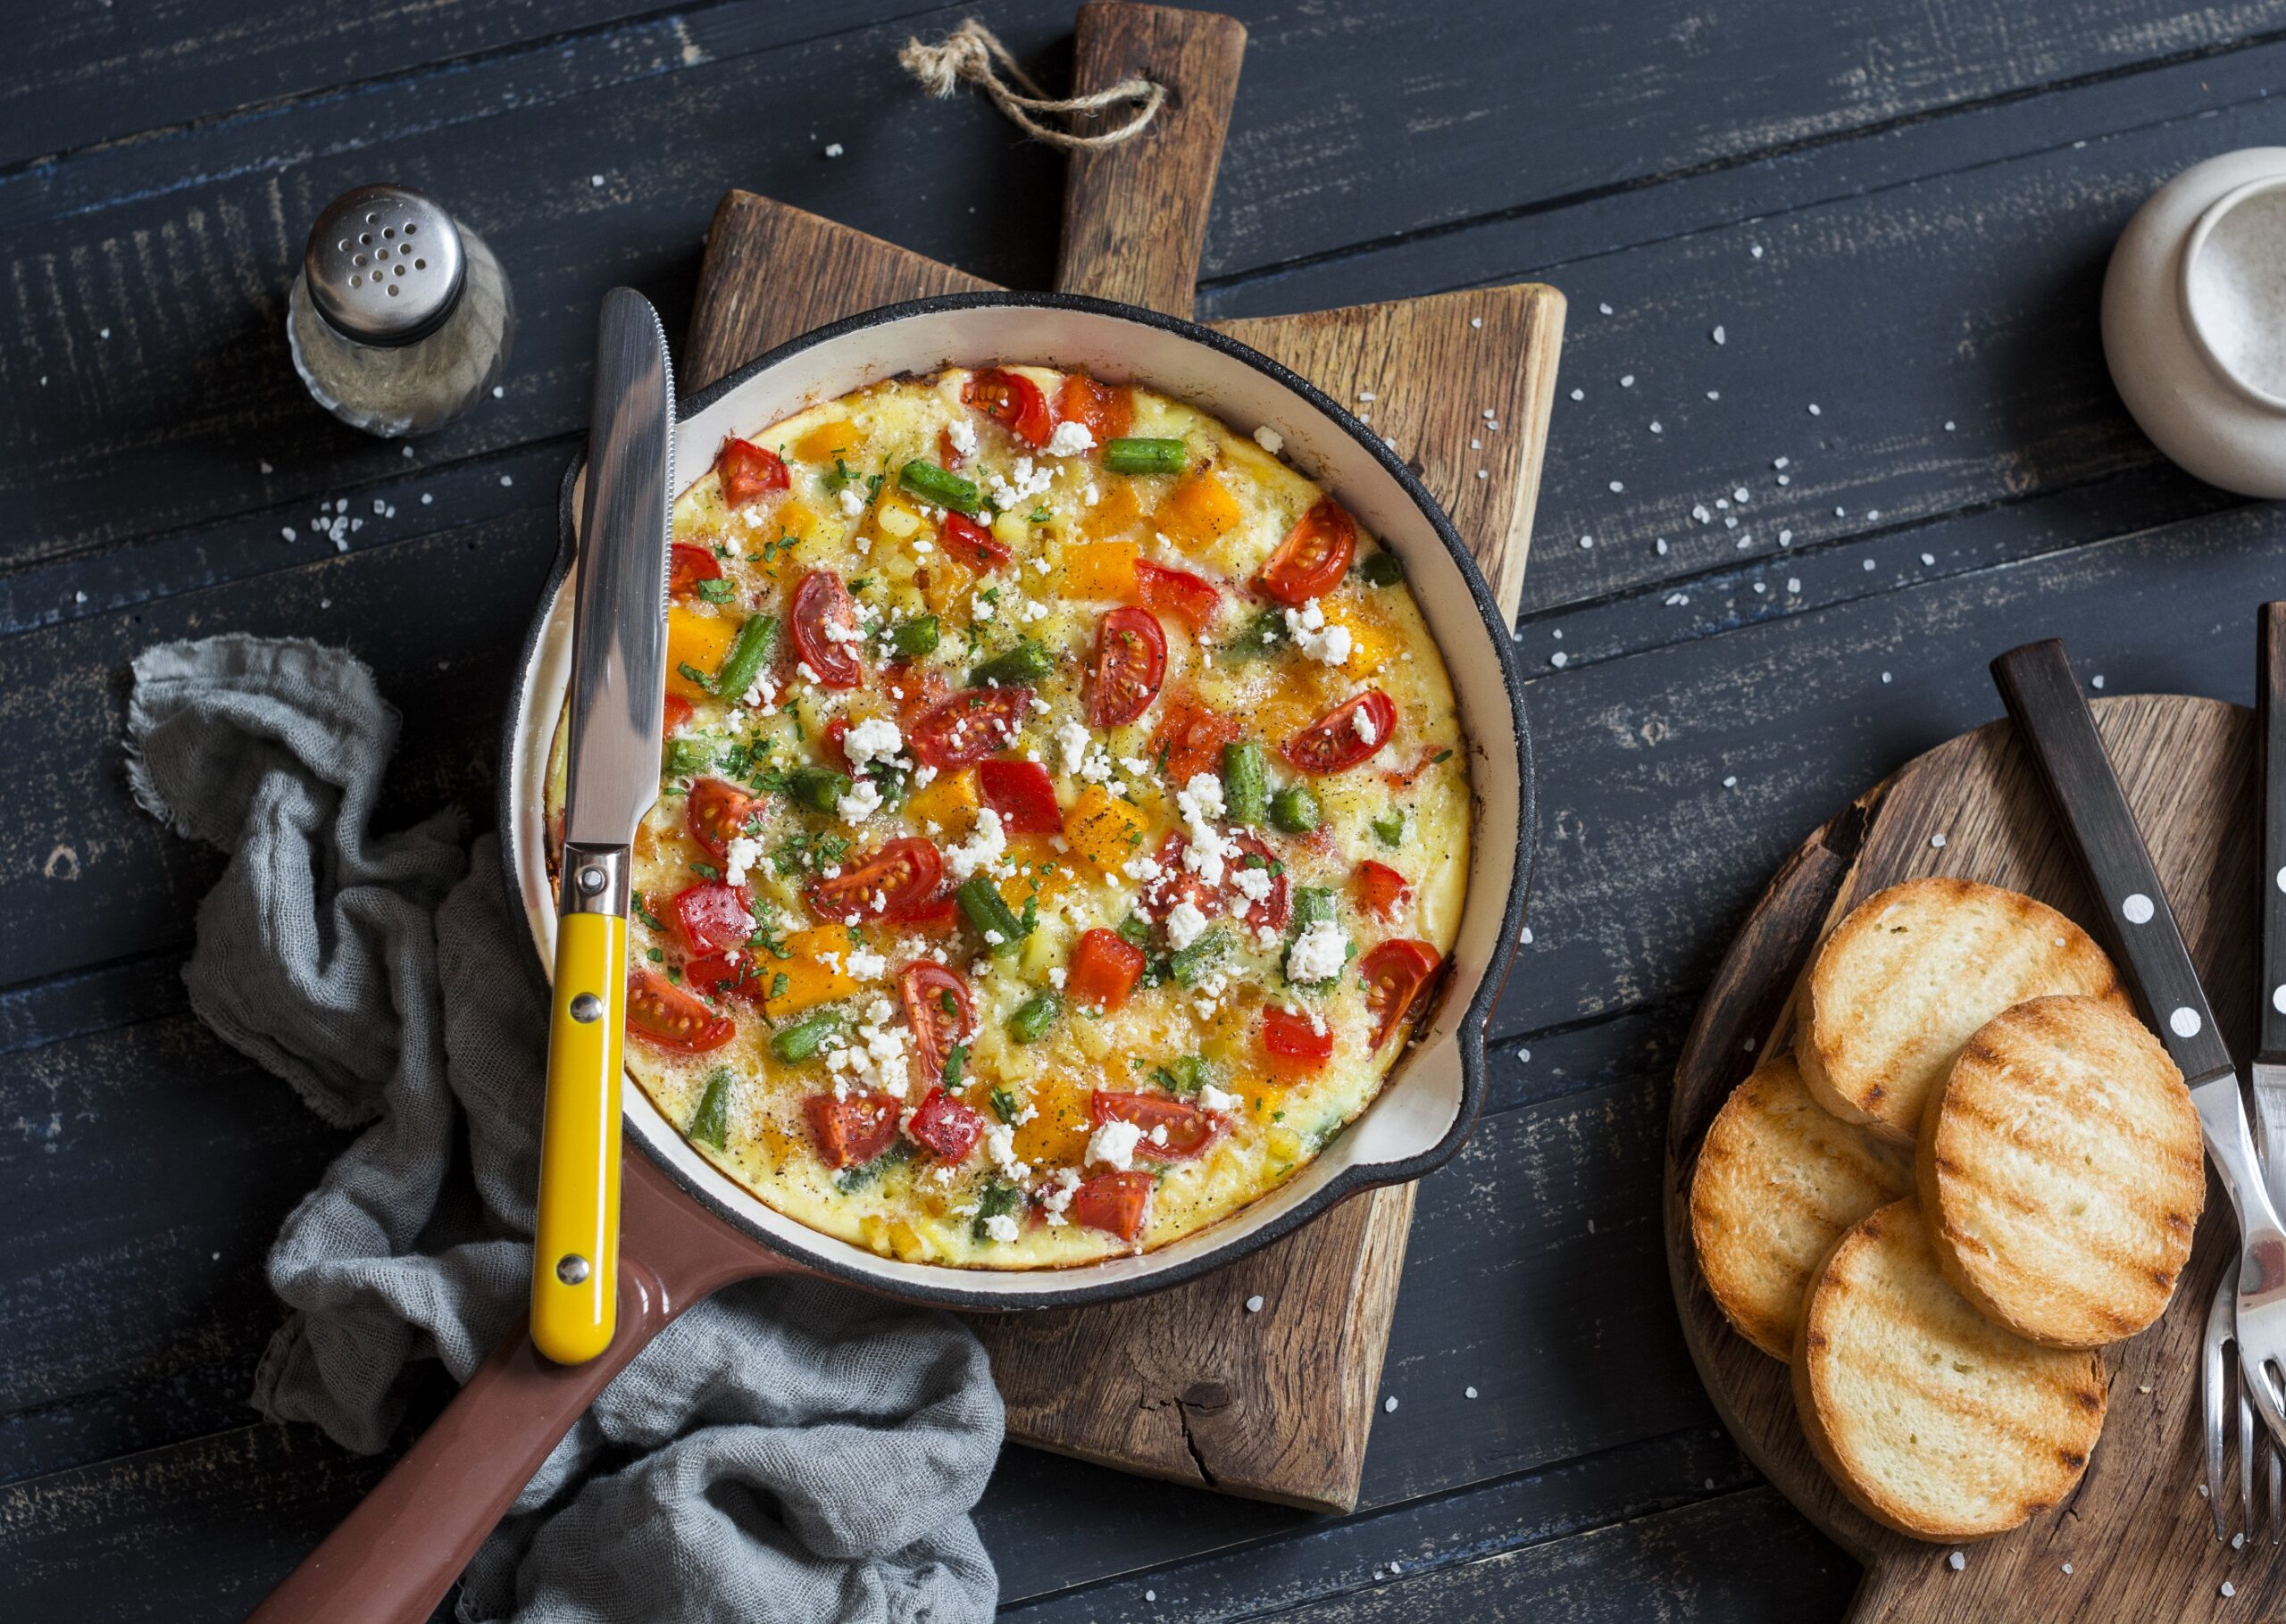 Fortisip Compact Protein Neutral Recipe Vegetable frittata in a cast iron skillet